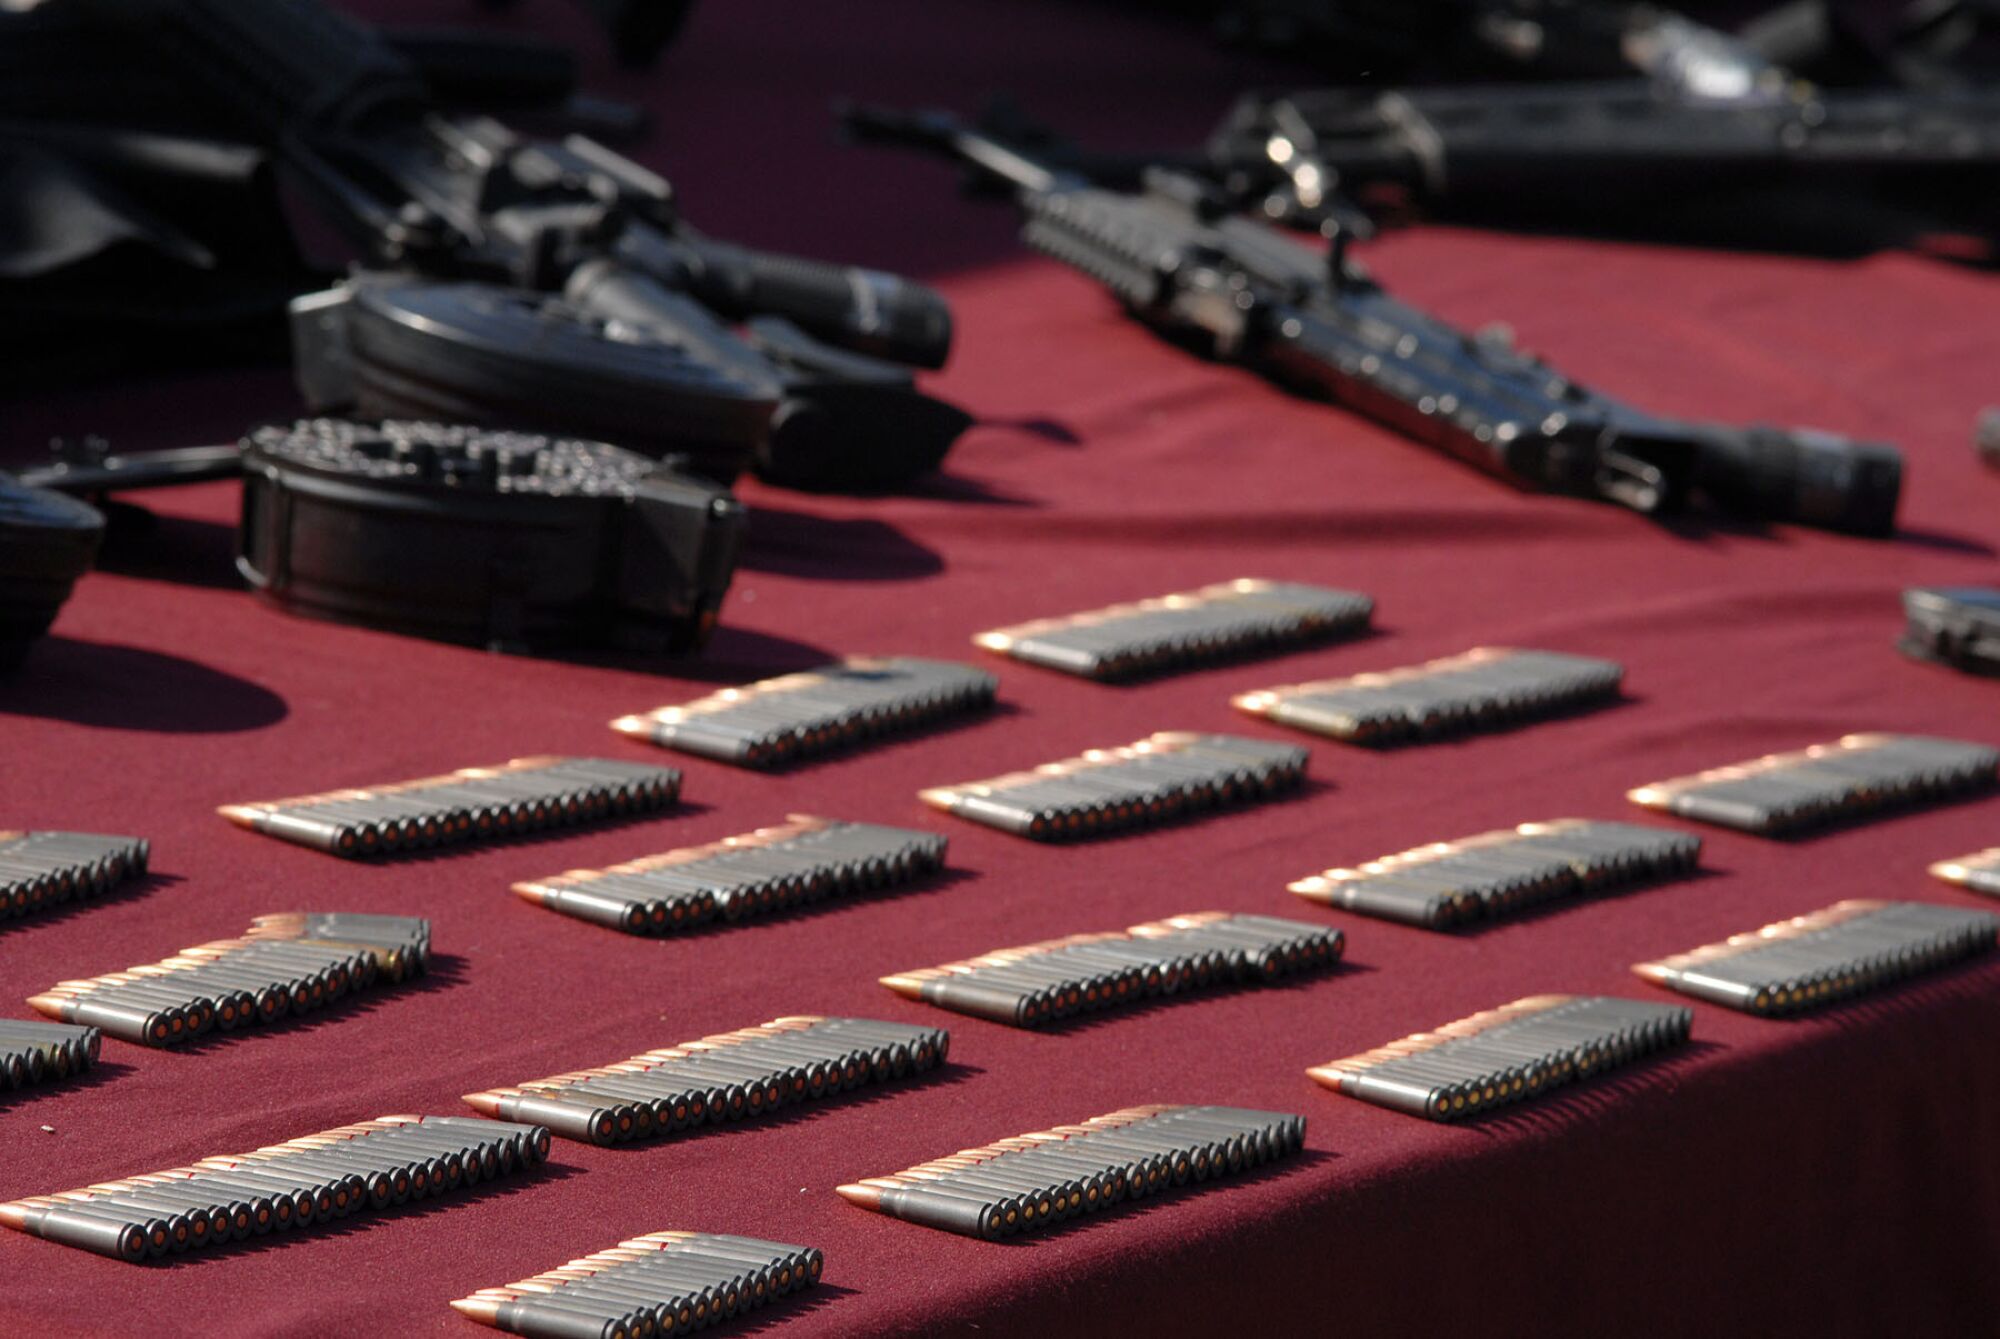 Ammunition and weapons on display during a presentation at Tijuana's main military base in 2009.